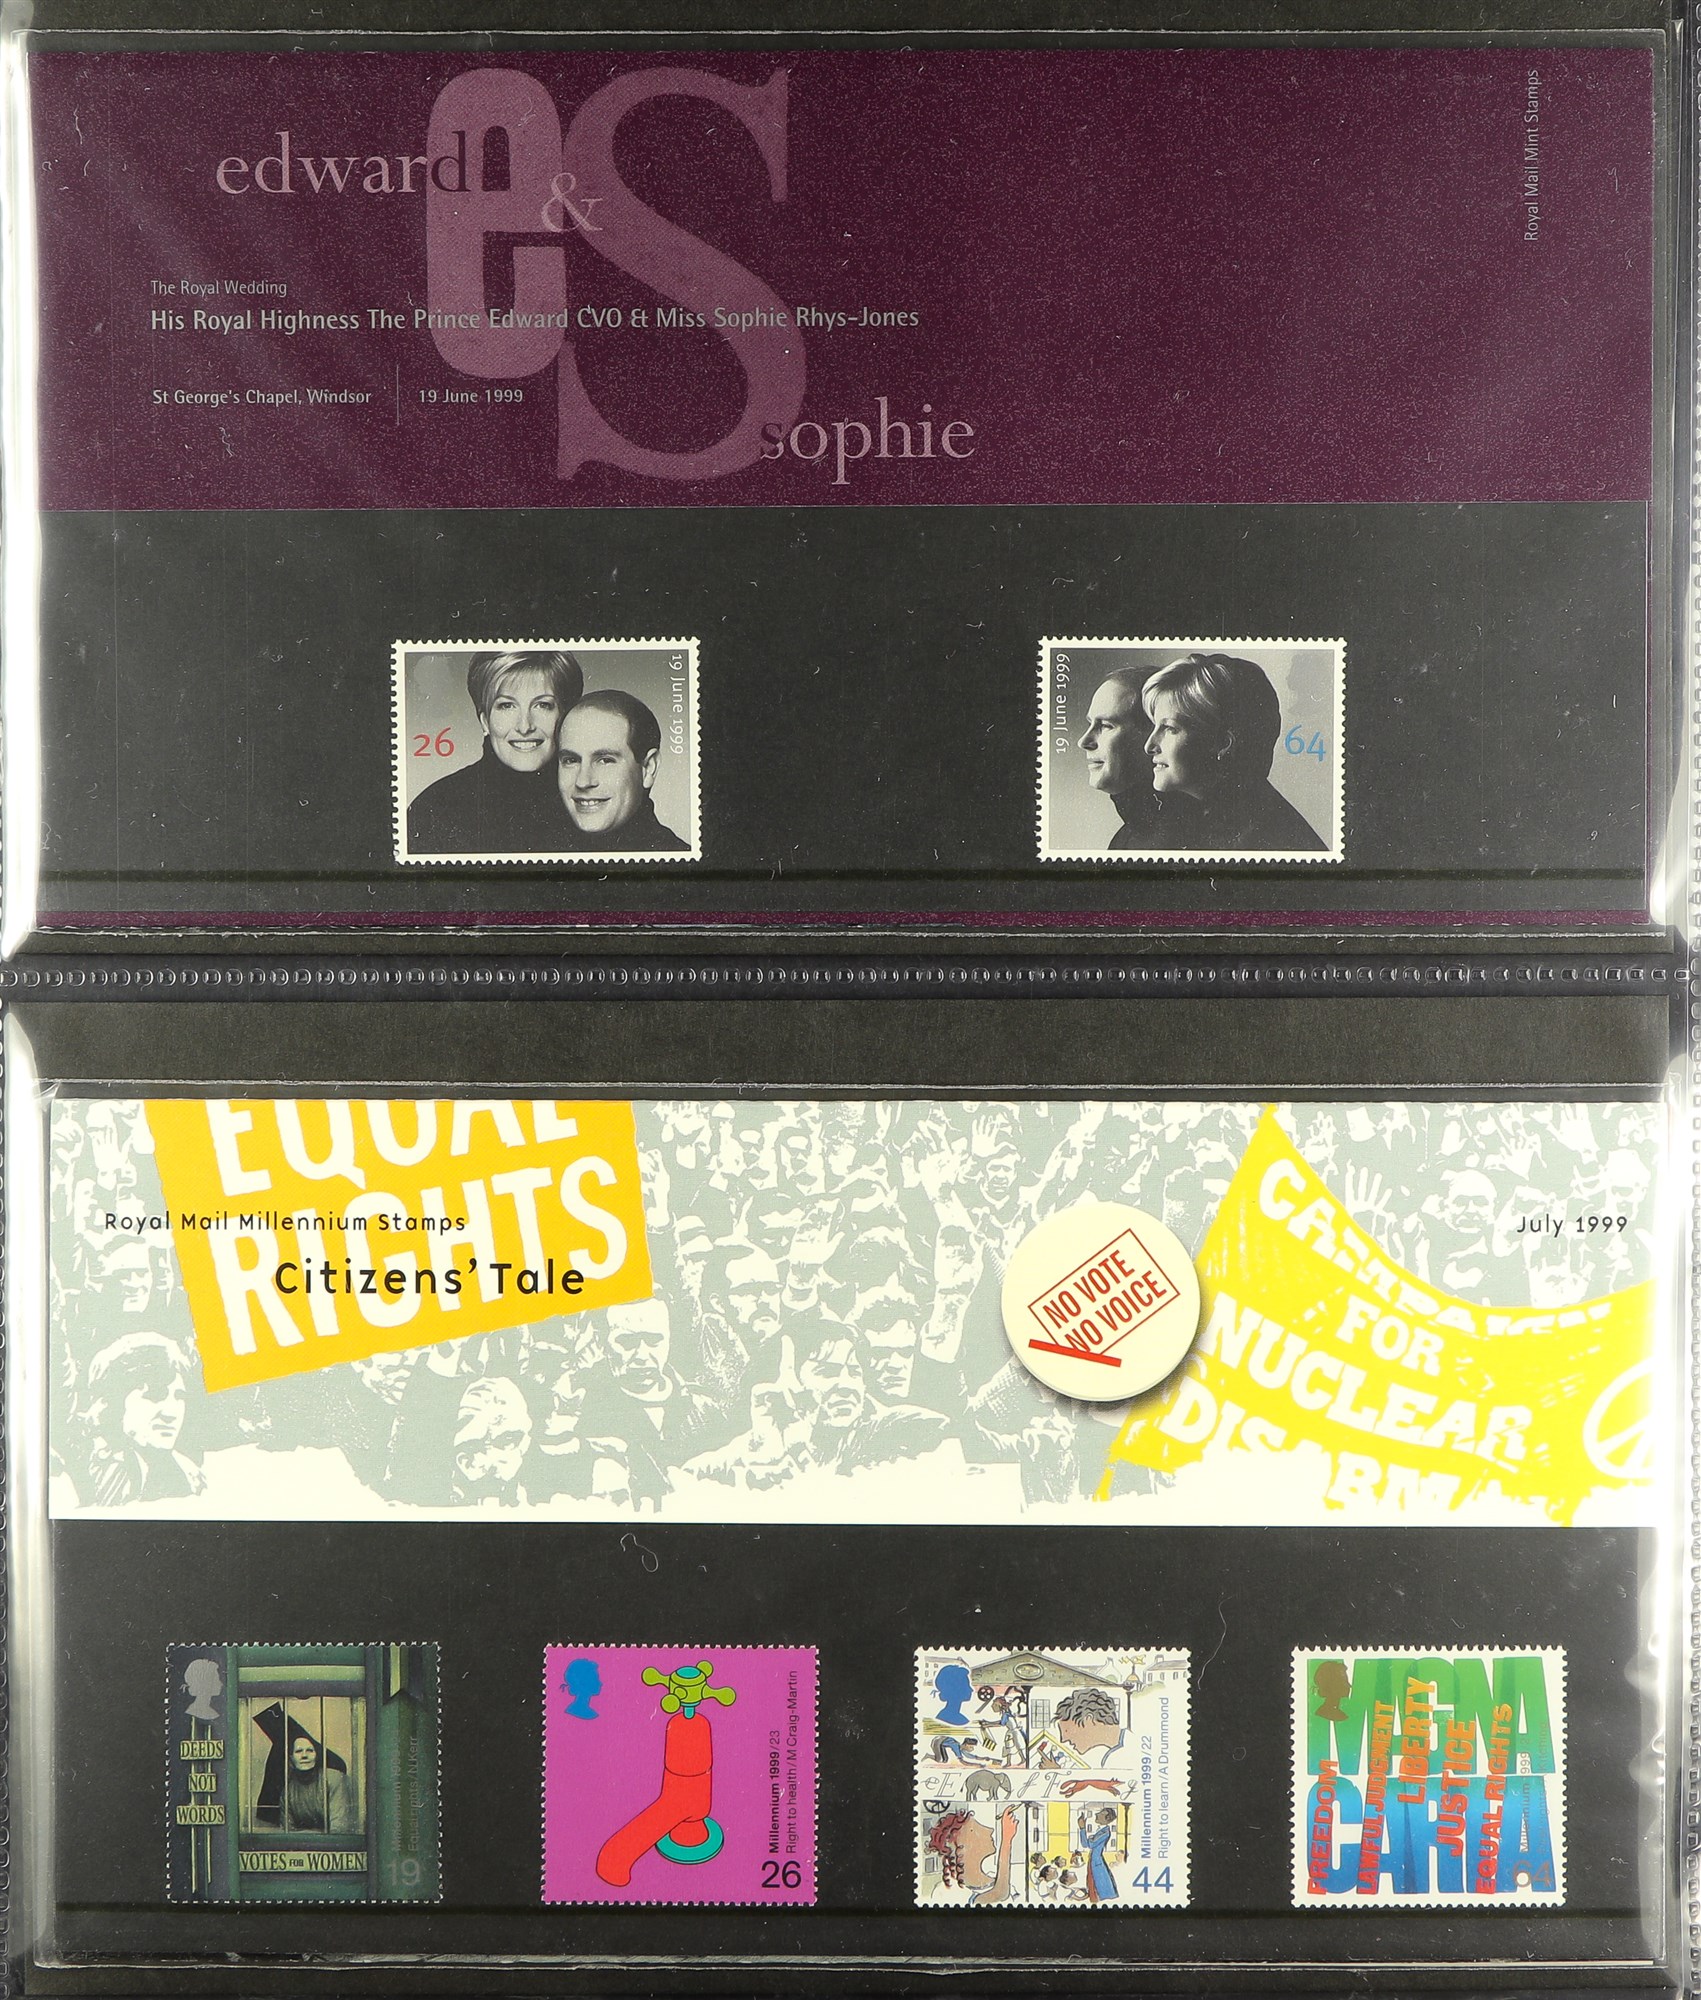 GREAT BRITAIN MOSTLY GREAT BRITAIN including 1970's-2000 presentation packs in albums, large blocks, - Image 10 of 25